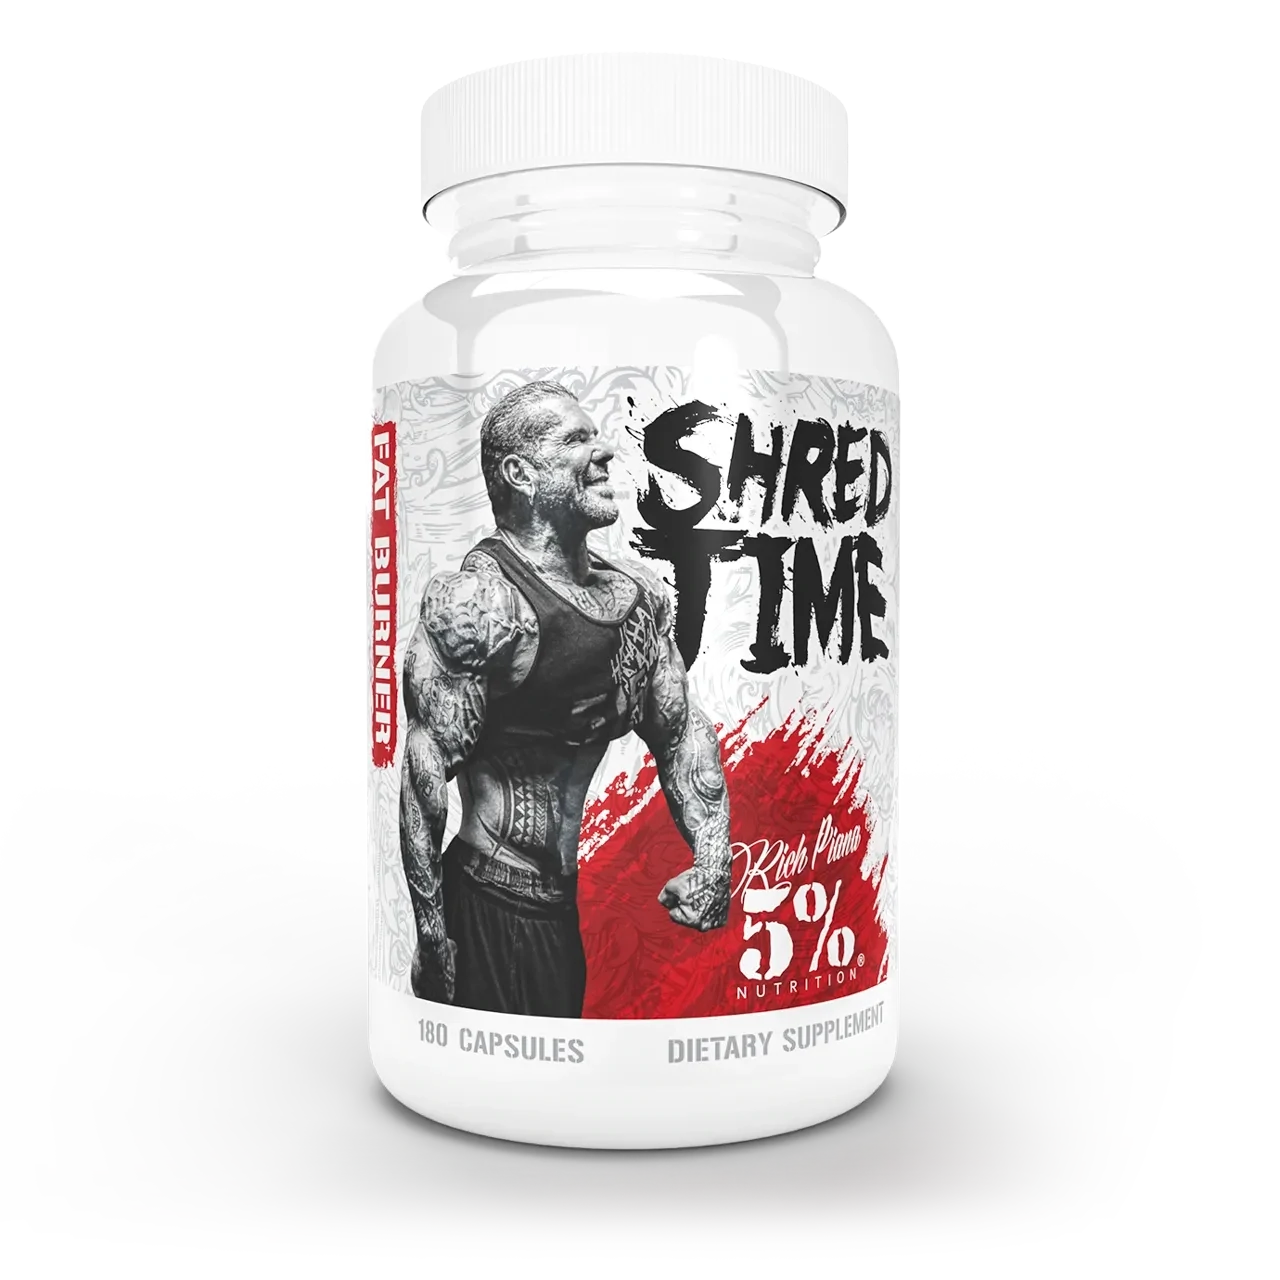 5% Nutrition Shred Time